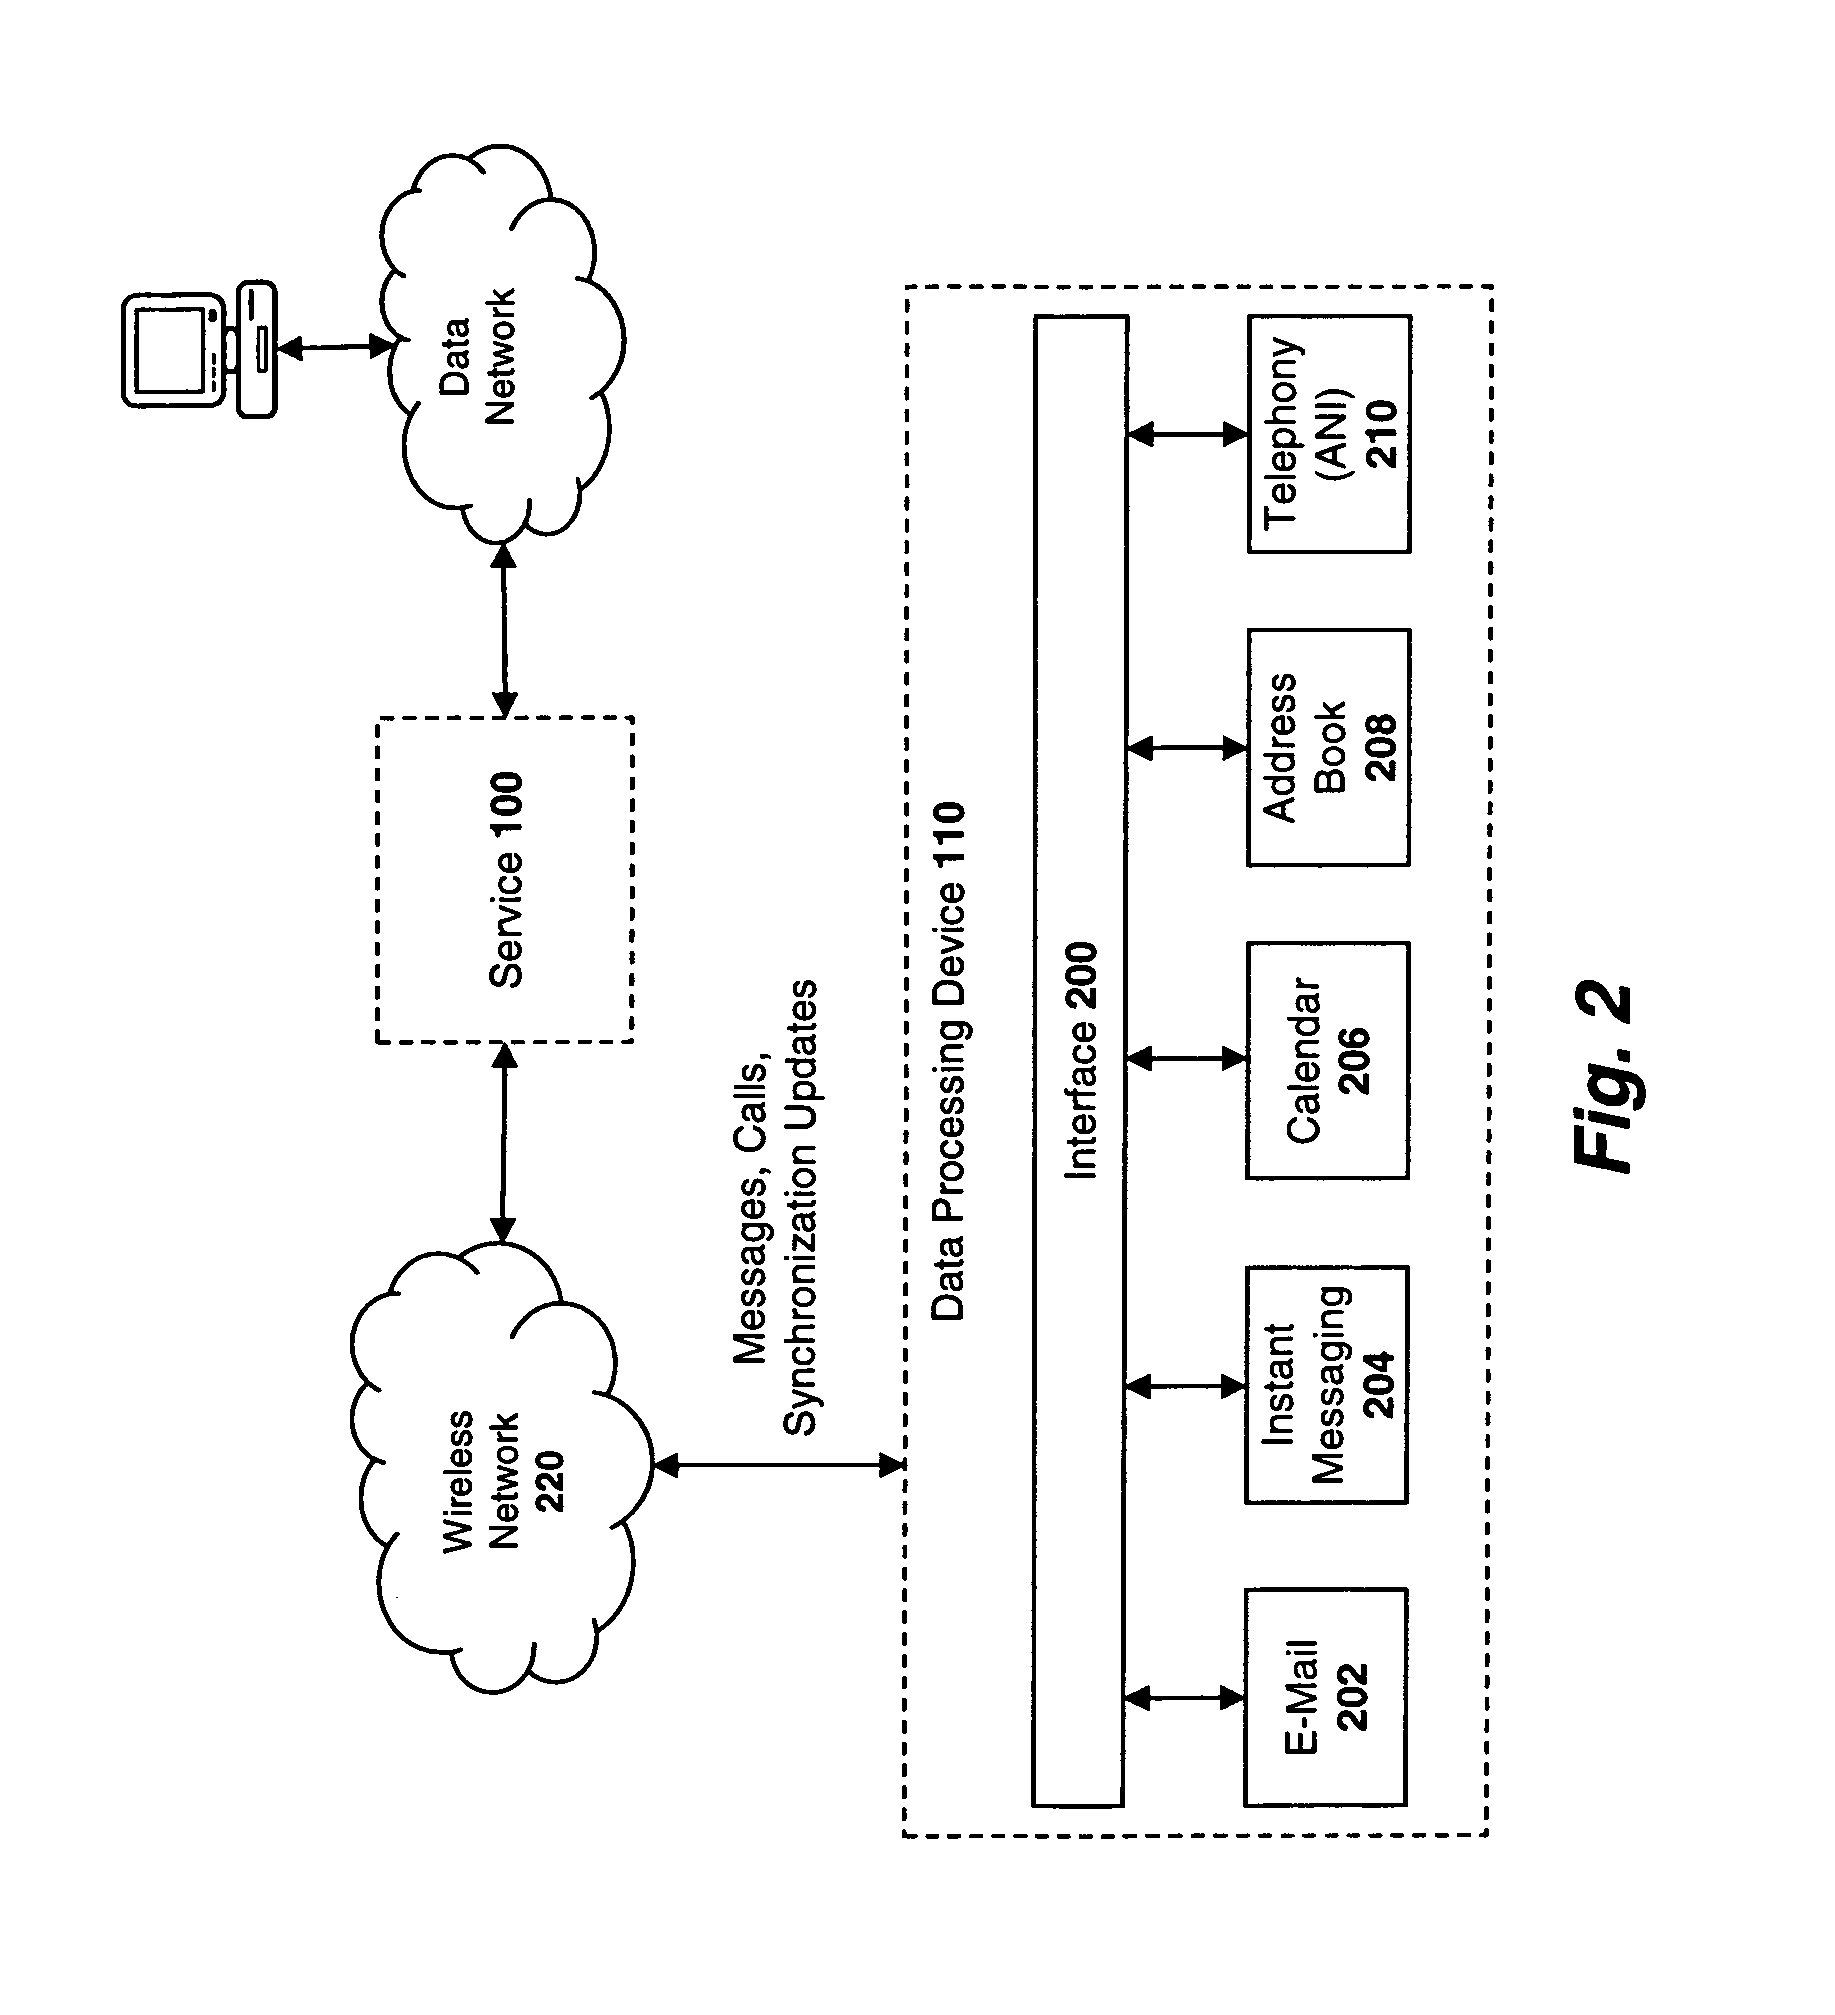 System and method for integrating personal information management and messaging applications